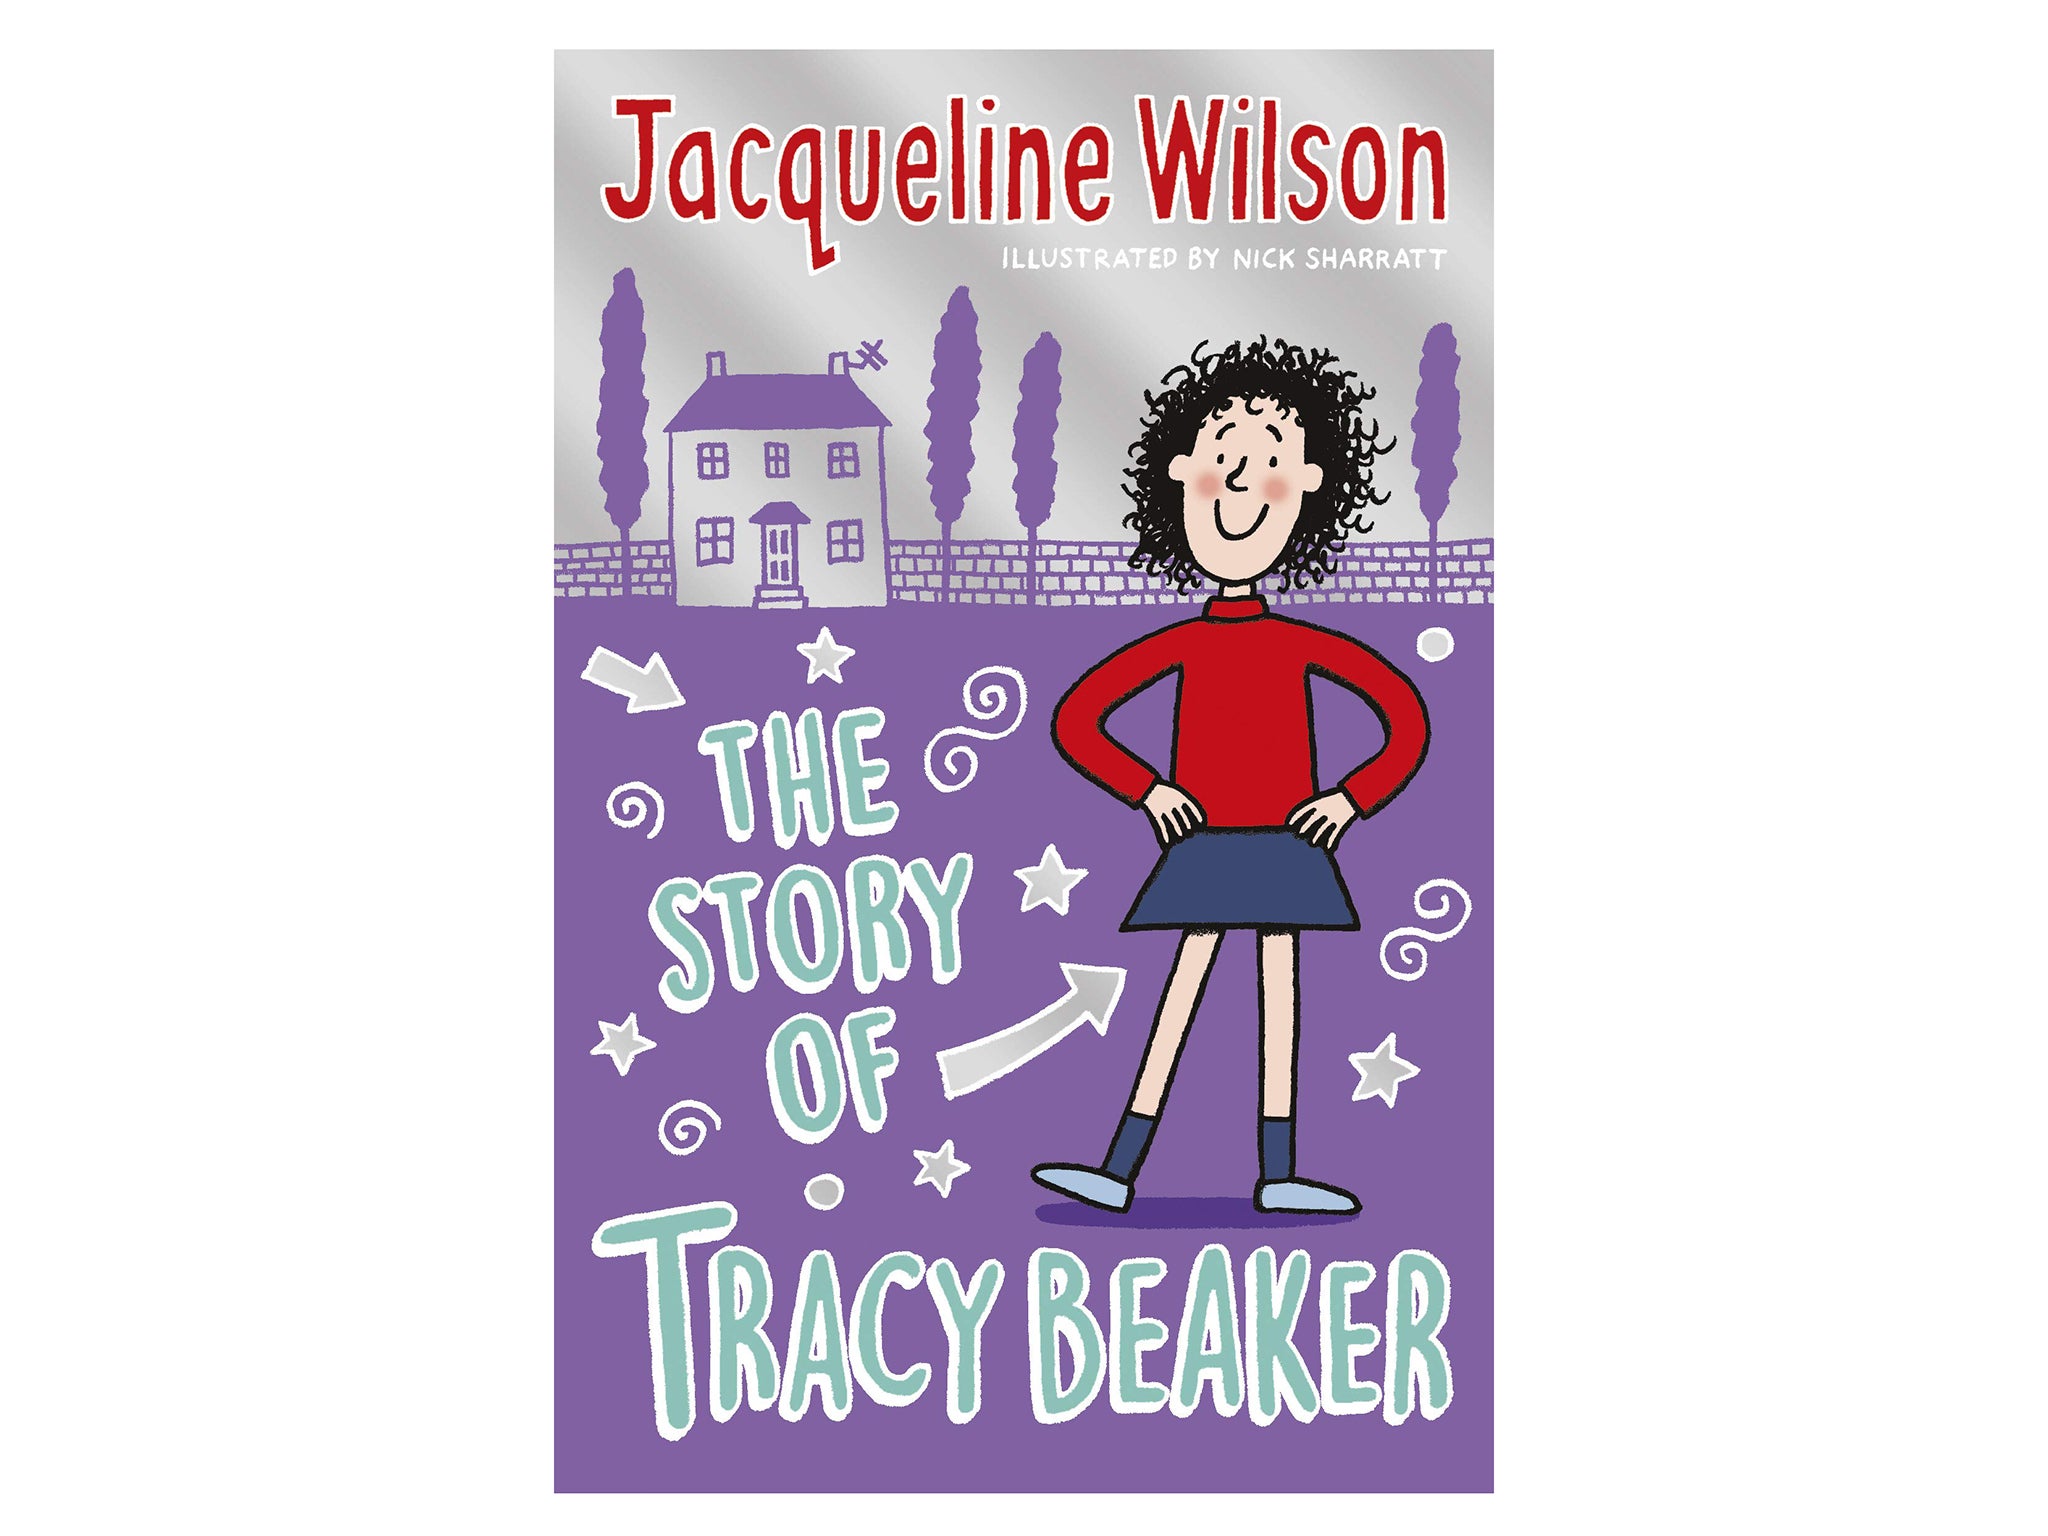 the-story-of-tracy-beaker-indybest-jacqueline-Wilson.jpg